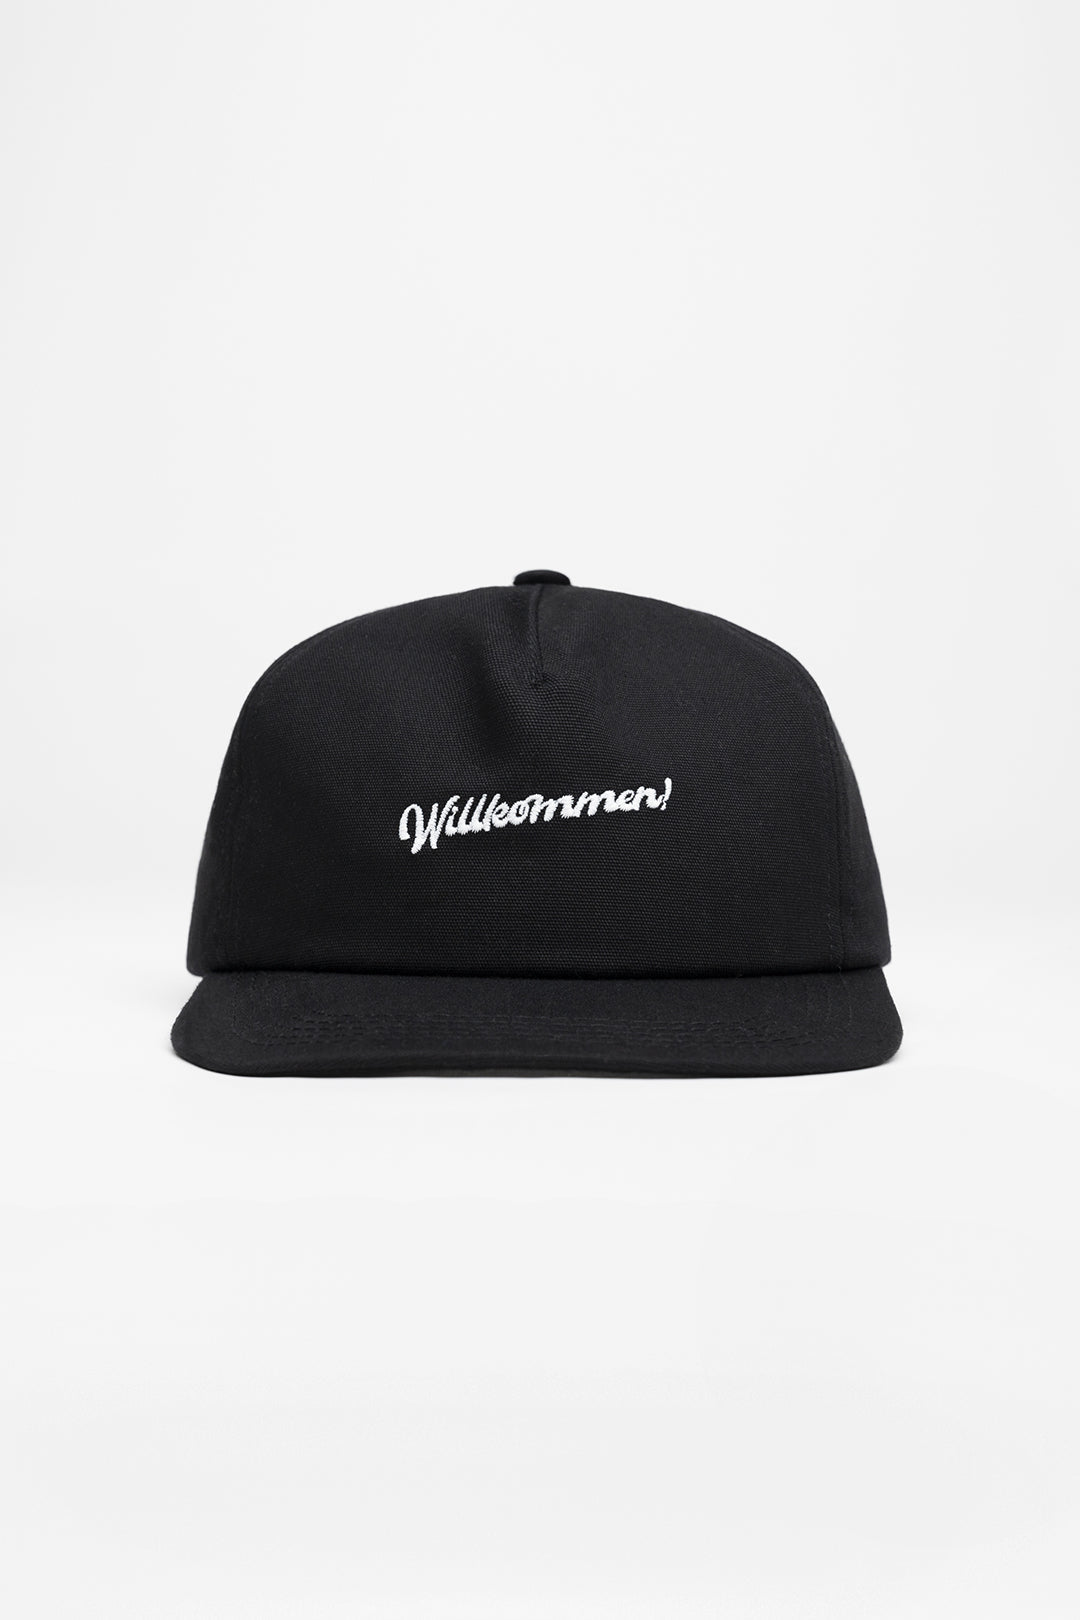 Black welcome cap made from 100% organic cotton from Rotholz